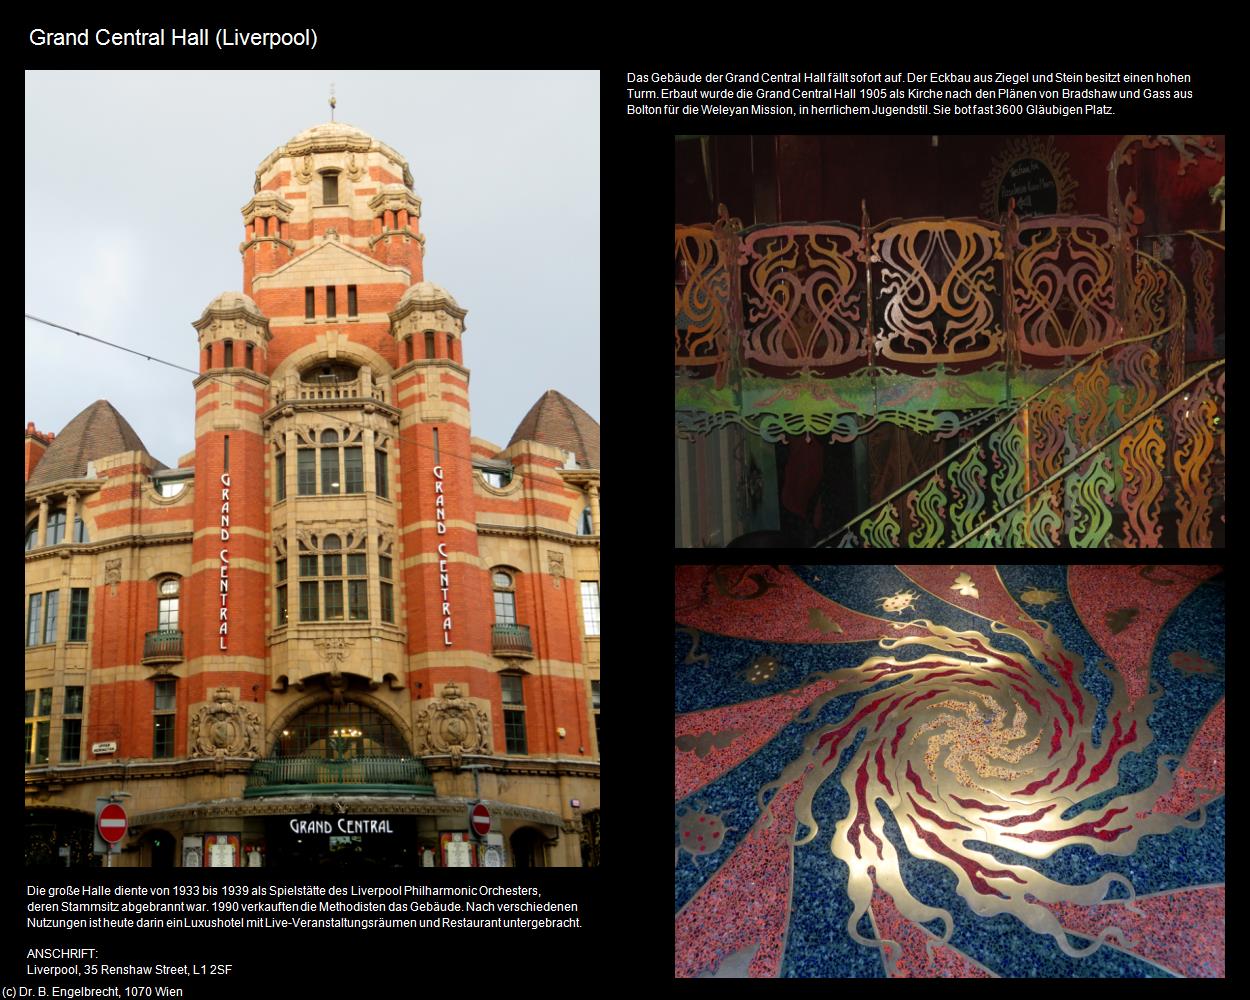 Grand Central Hall  (Liverpool, England) in Kulturatlas-ENGLAND und WALES